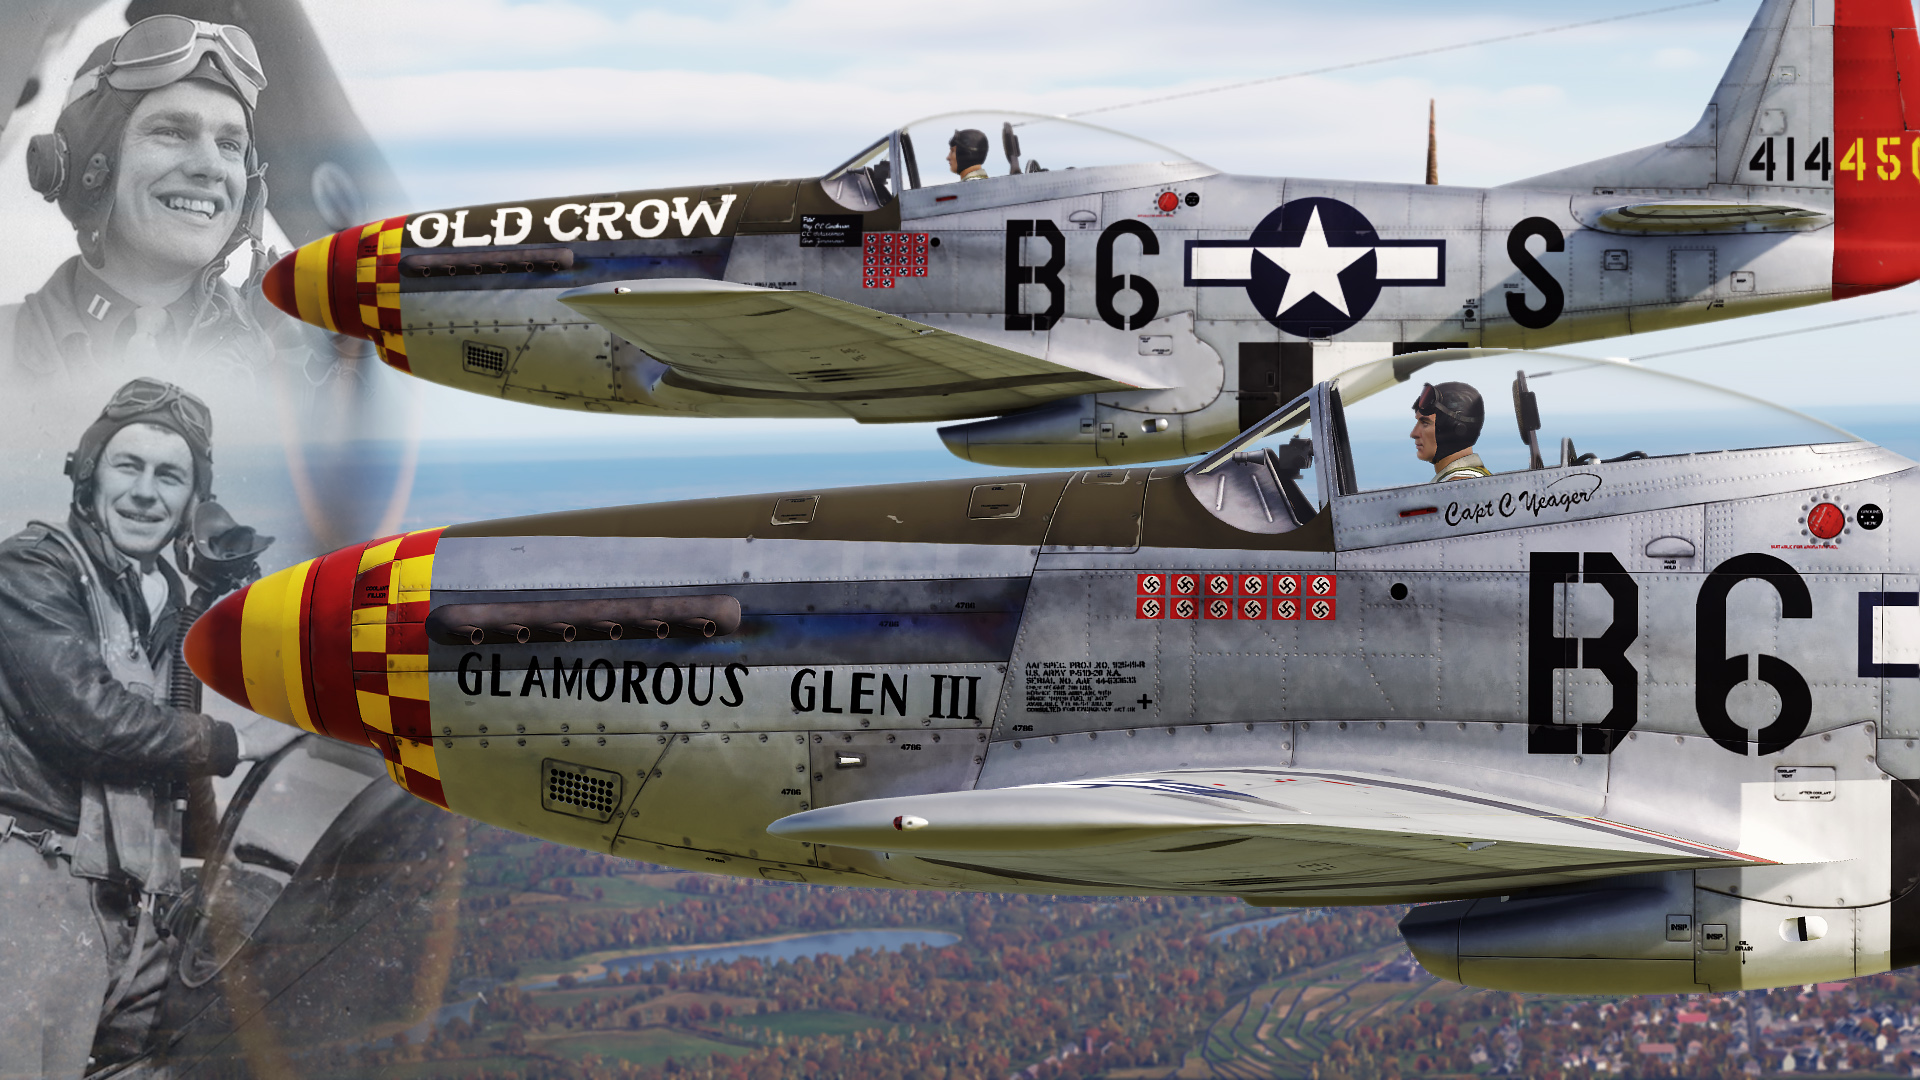 P-51, 363rd Fighter Squadron, C.E.Anderson's "OLD CROW" and C. Yeager's "GLAMOROUS GLEN III" 